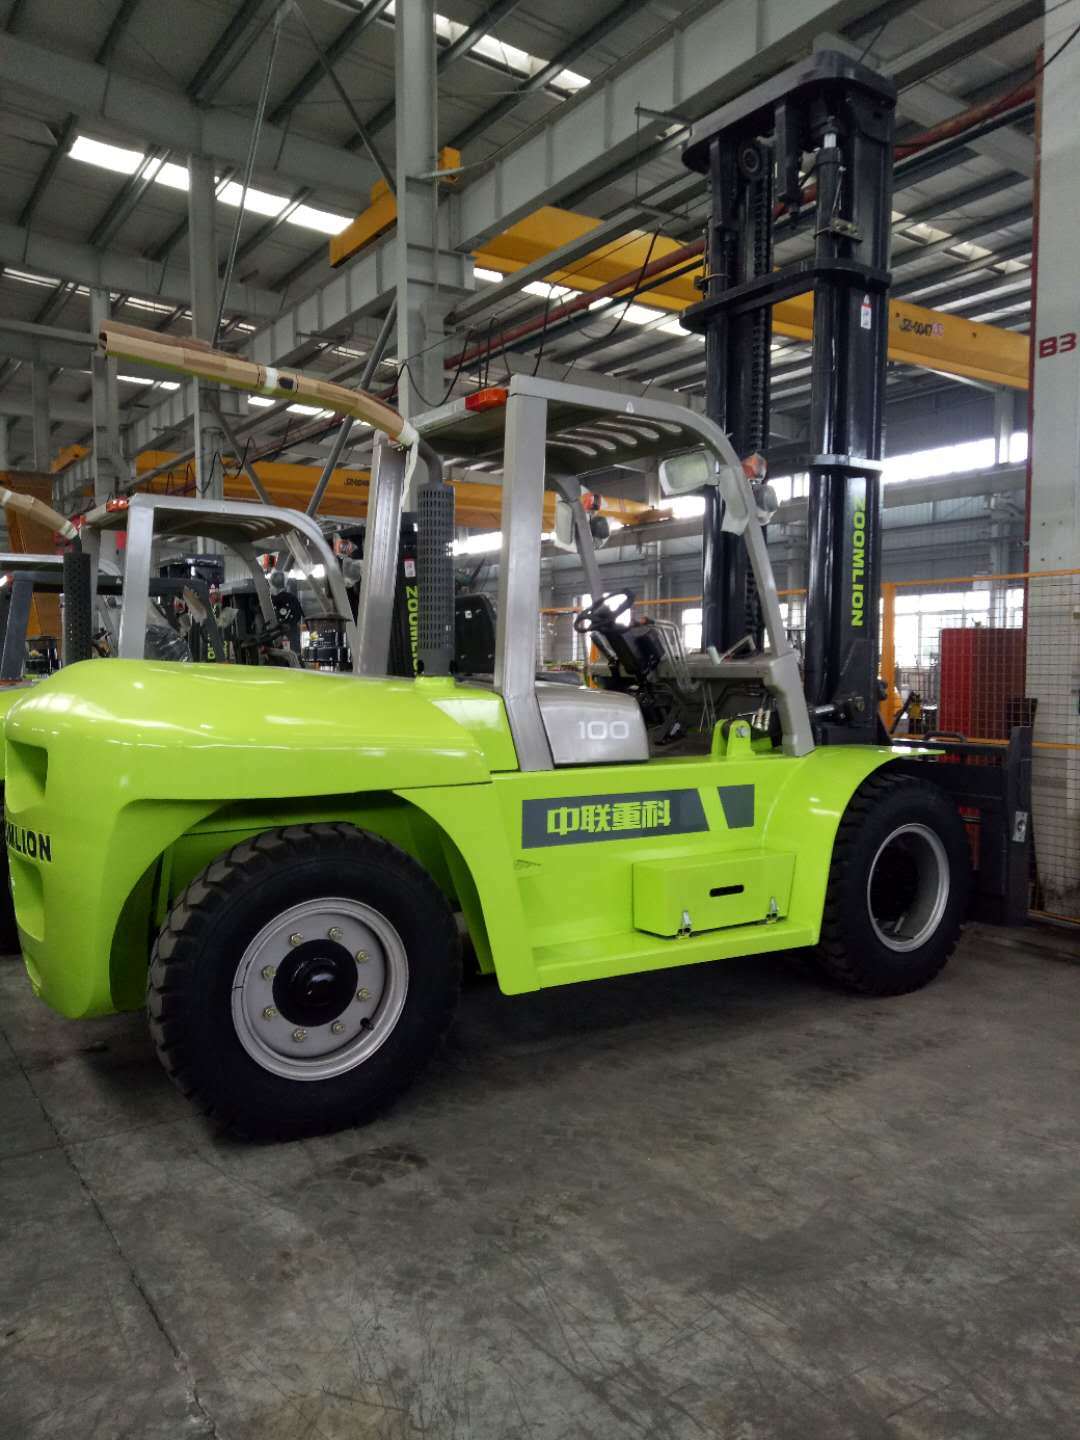 Zoomlion 3 Ton Diesel Small Forklift Fd30z Has in Stock